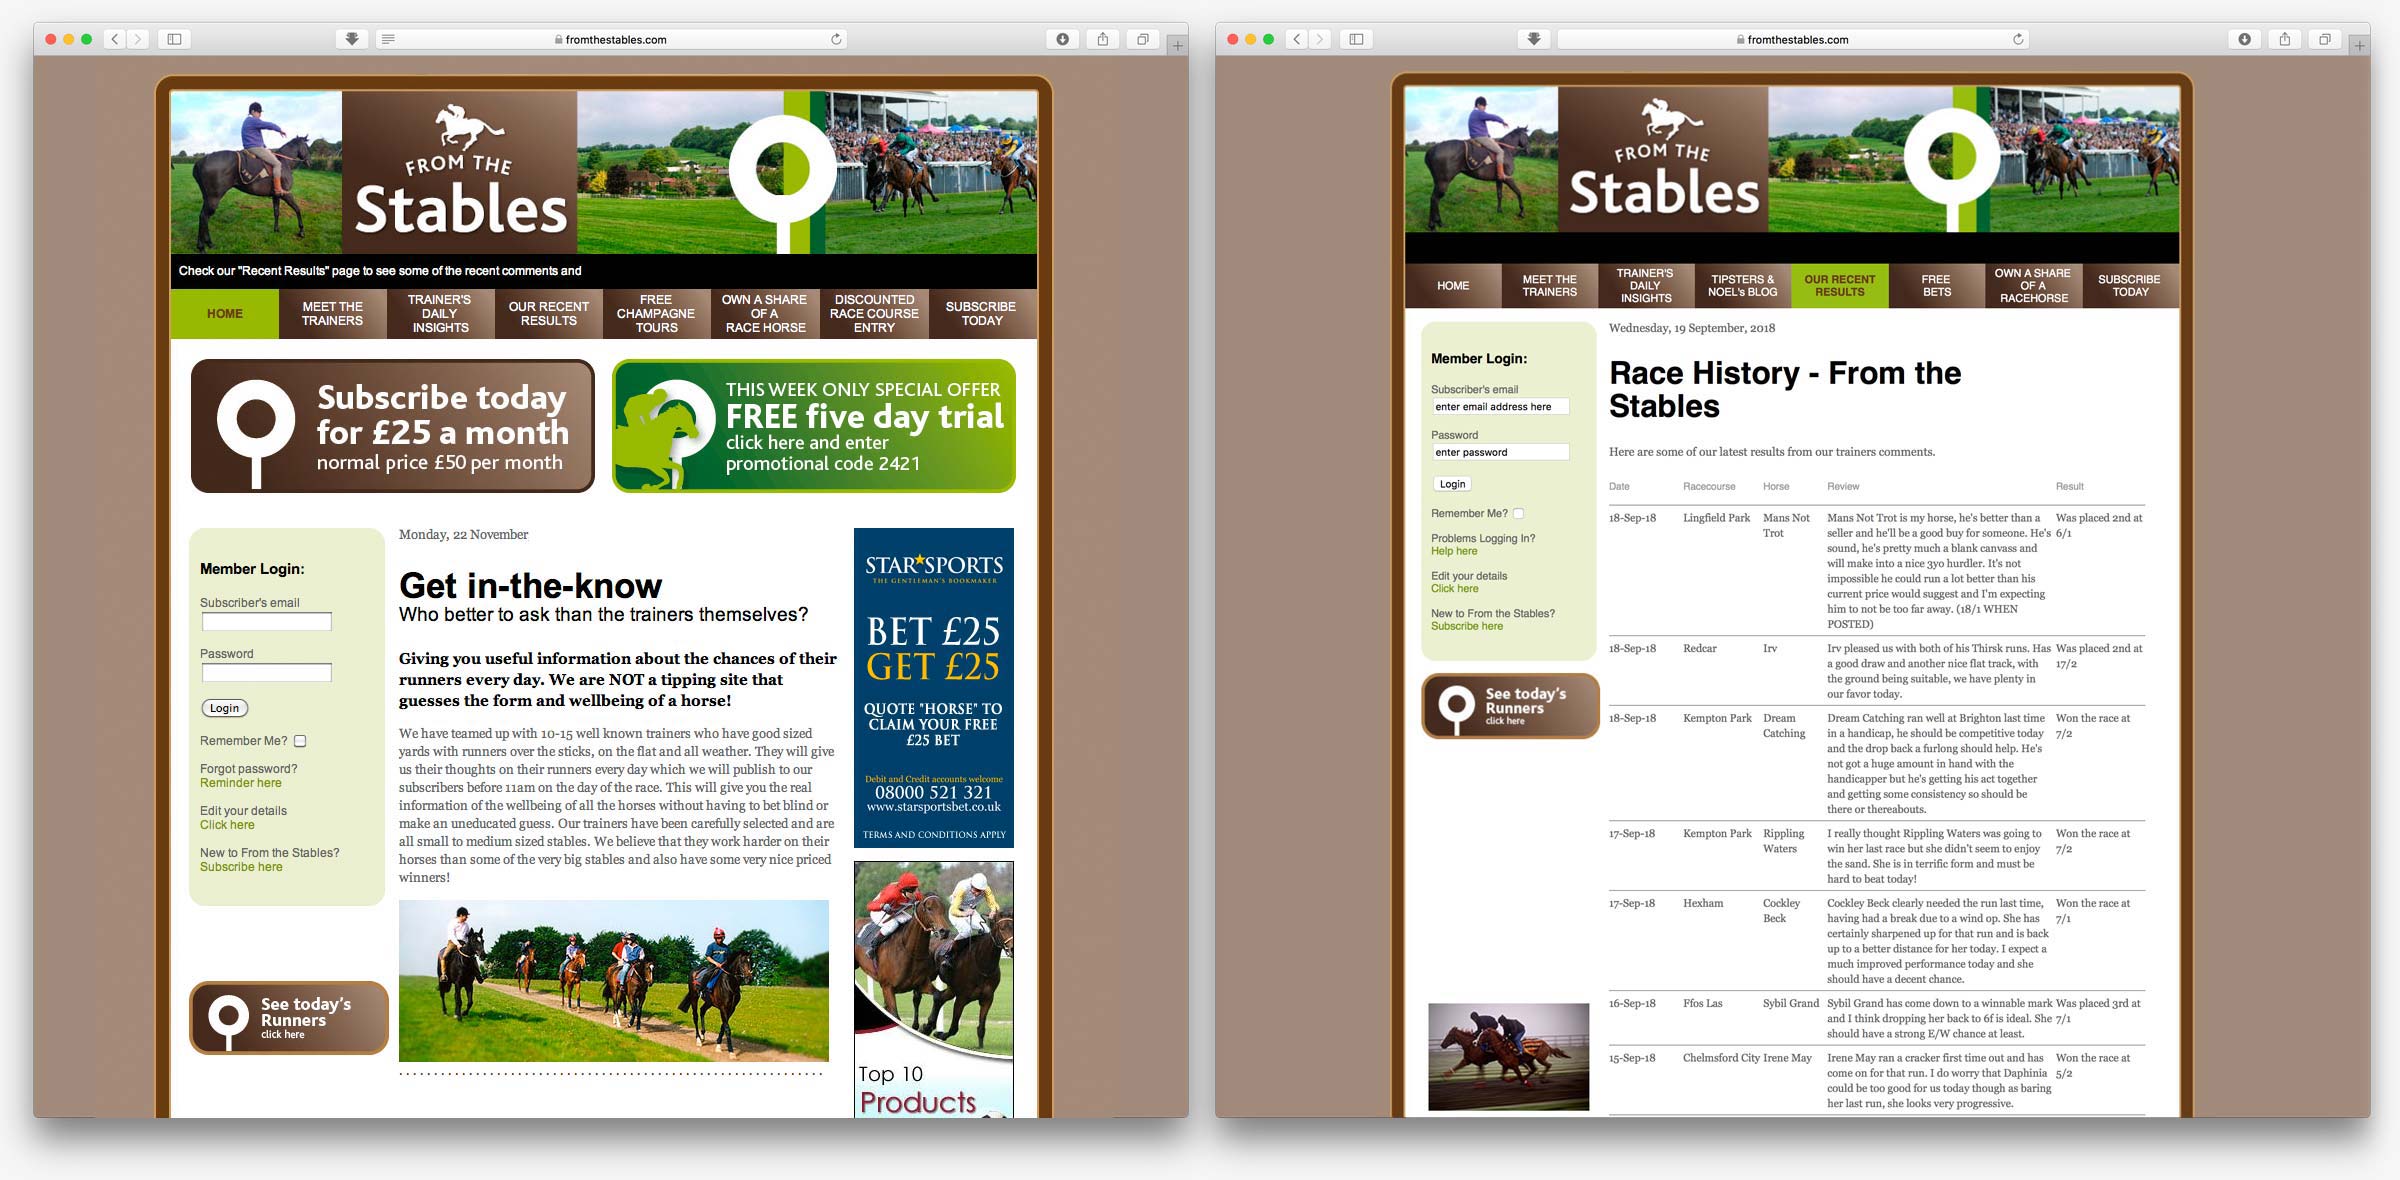 From the Stables website